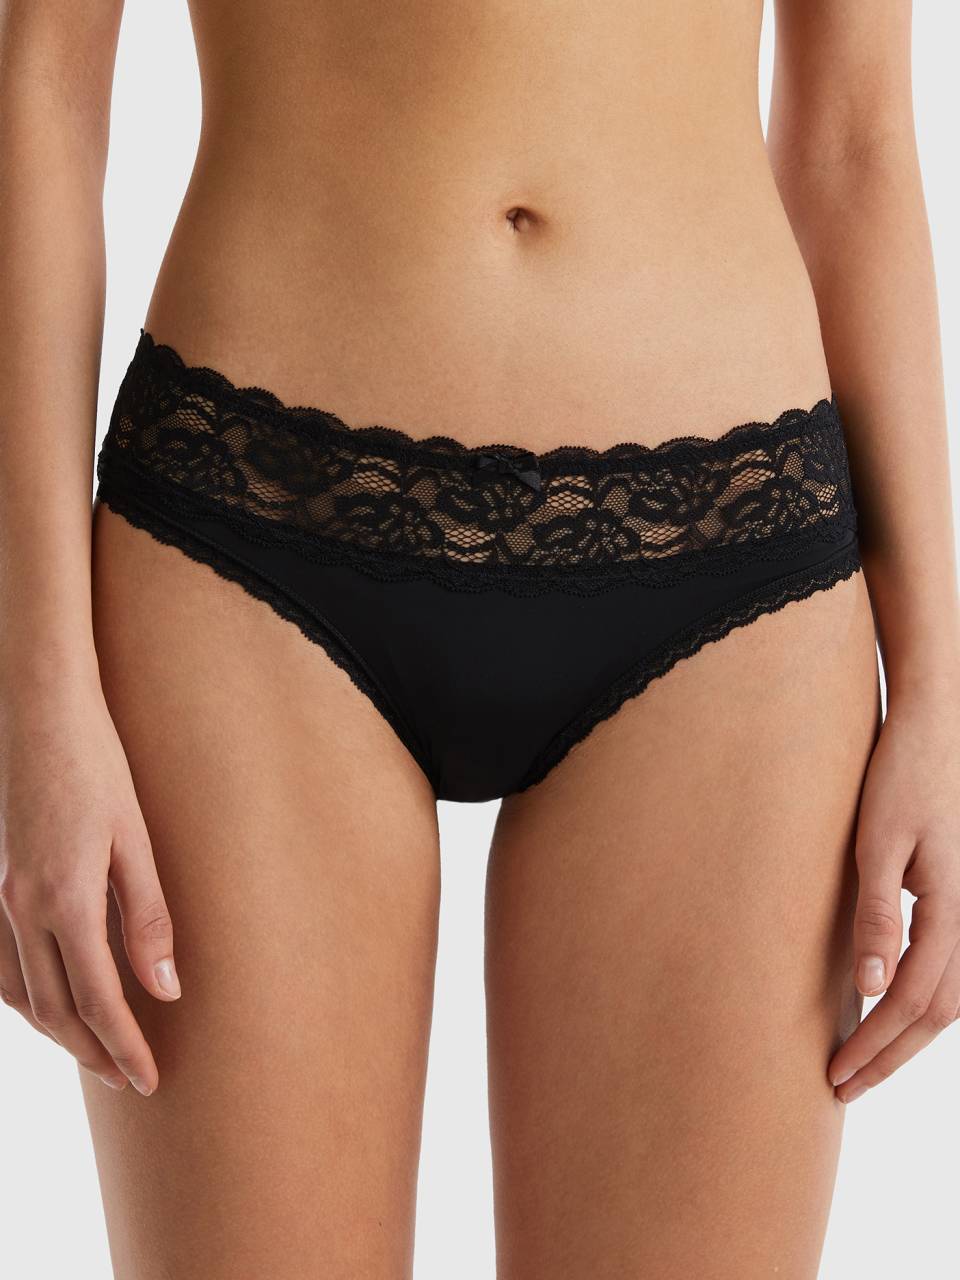 Benetton stretch underwear with lace. 1